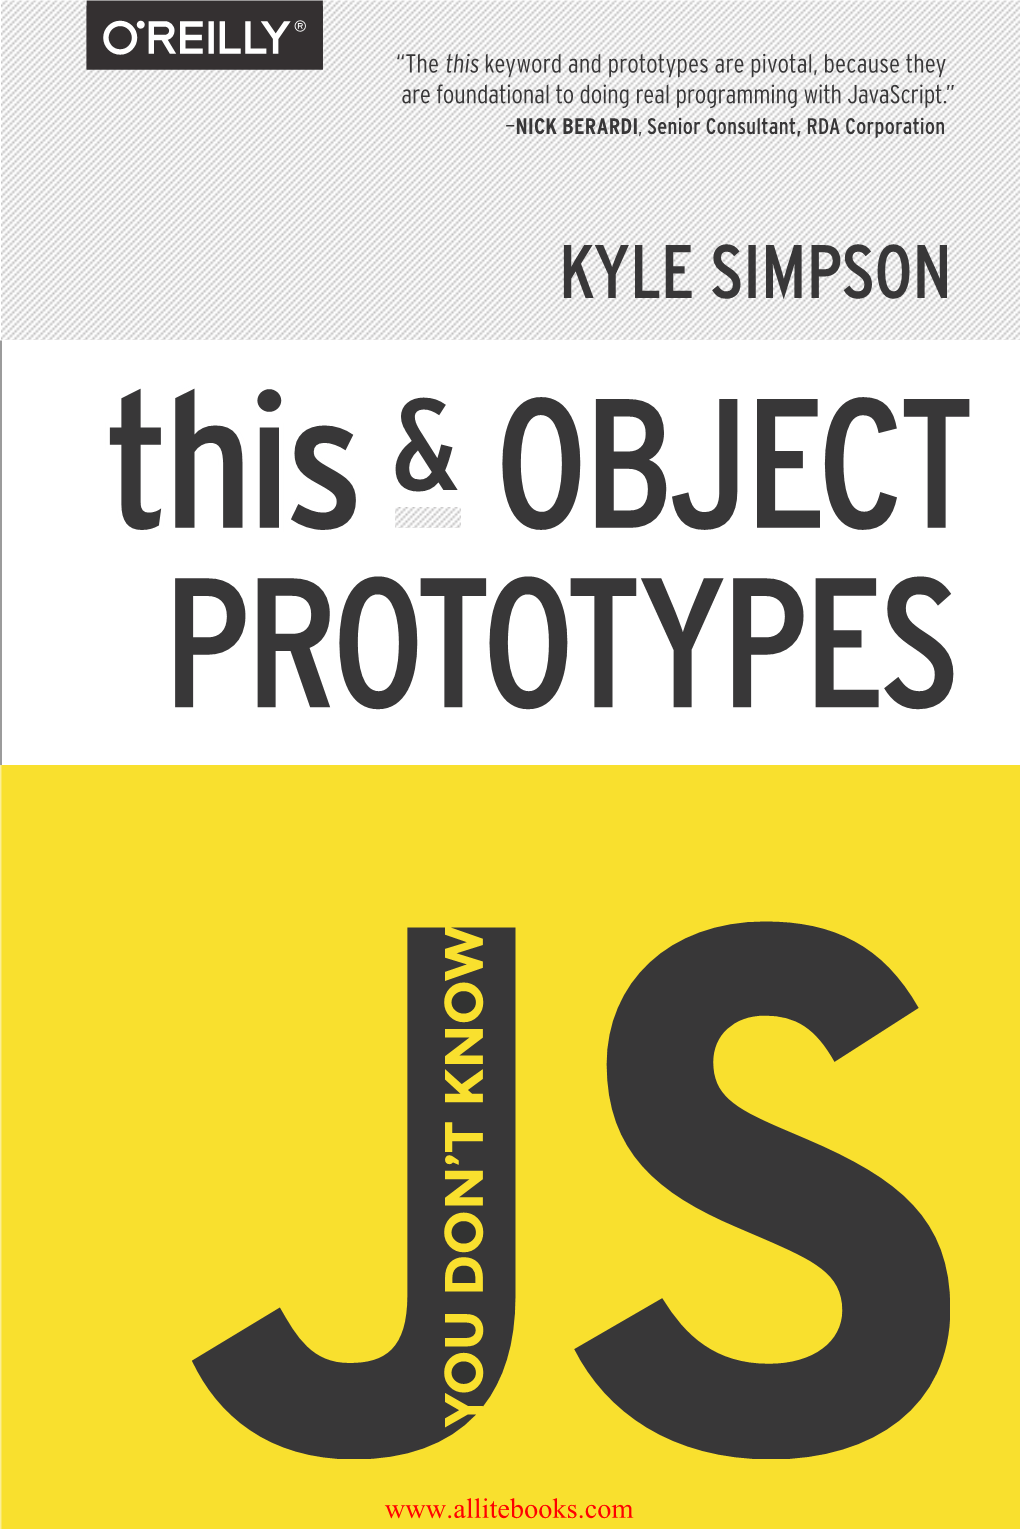 You Don't Know JS Series, This & Object Prototypes